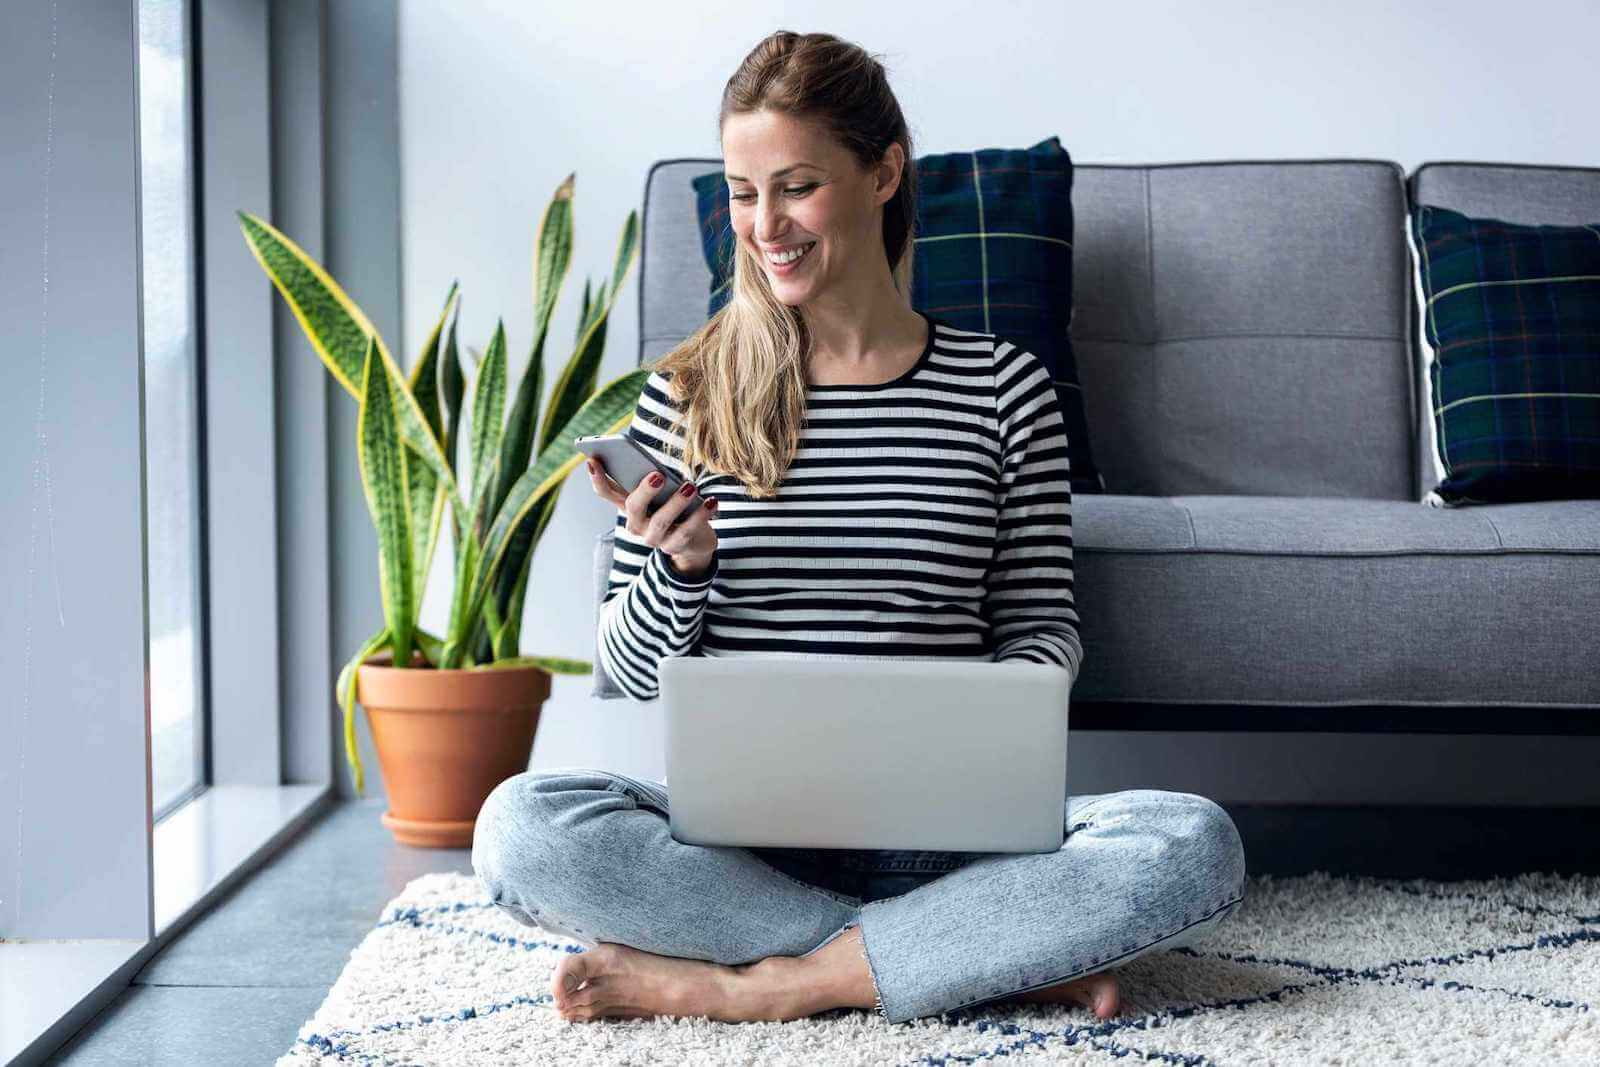 Smiling woman sitting on the floor in front of a sofa with a laptop and mobile phone.